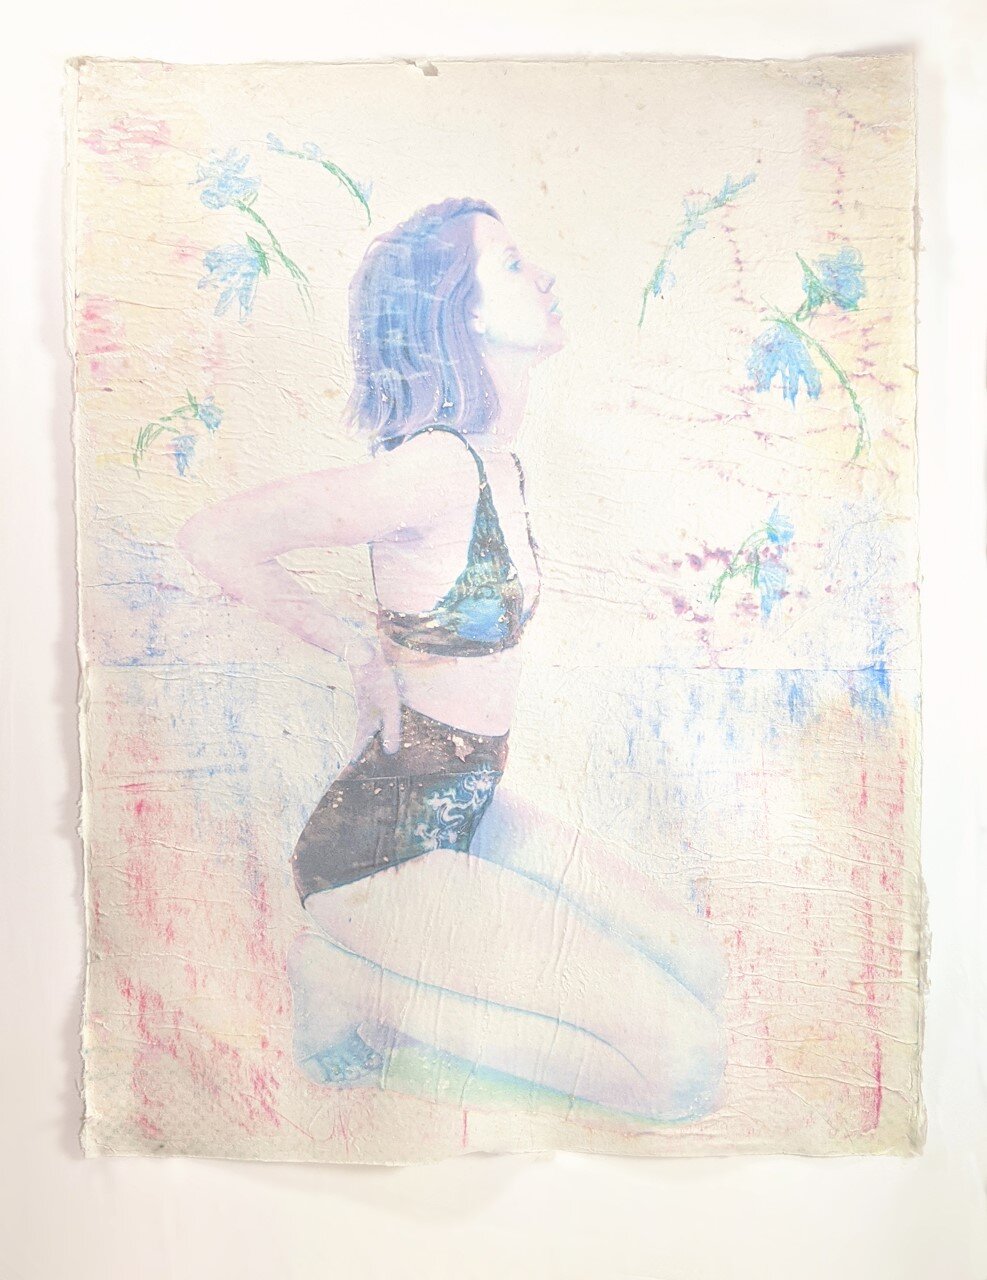  Kayla Story   Seeing myself through , 2020  From the series: All That is Solid Melts into Air  Handmade paper, digital image pressure transfer, watercolor 